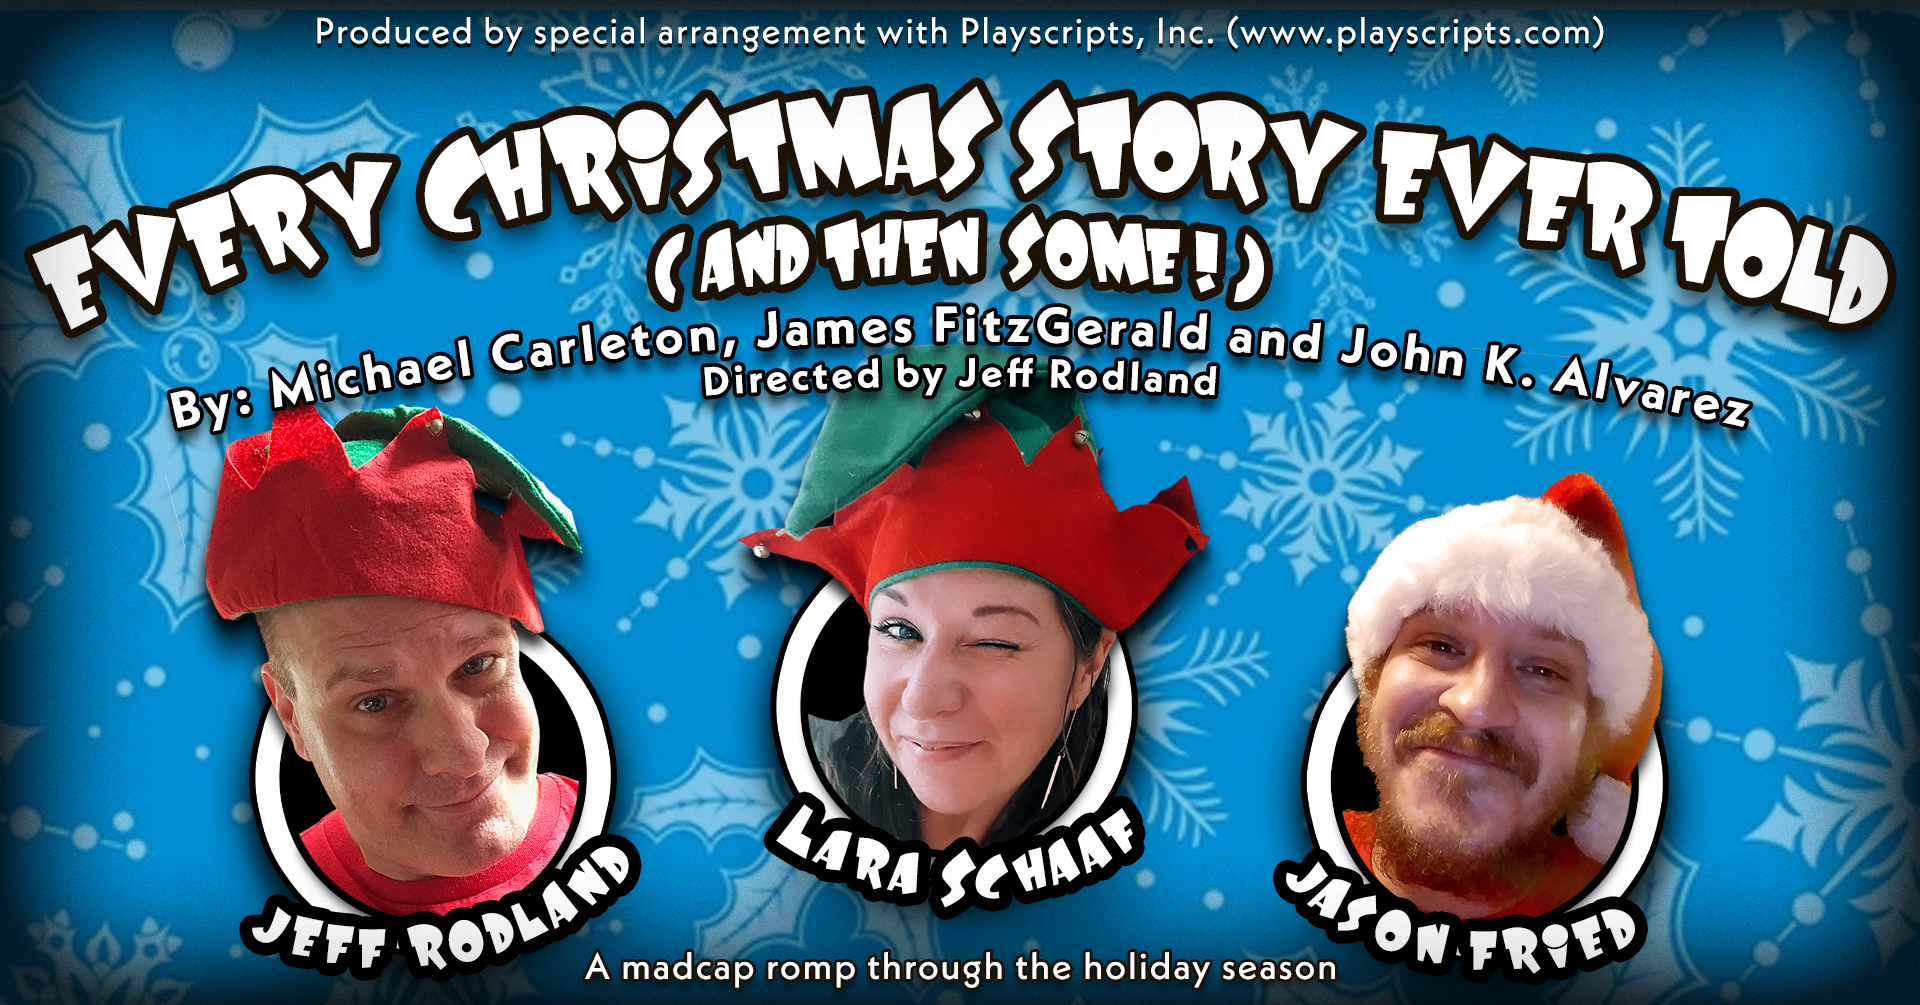 PACA presents: Every Christmas Story Ever Told (and then some)